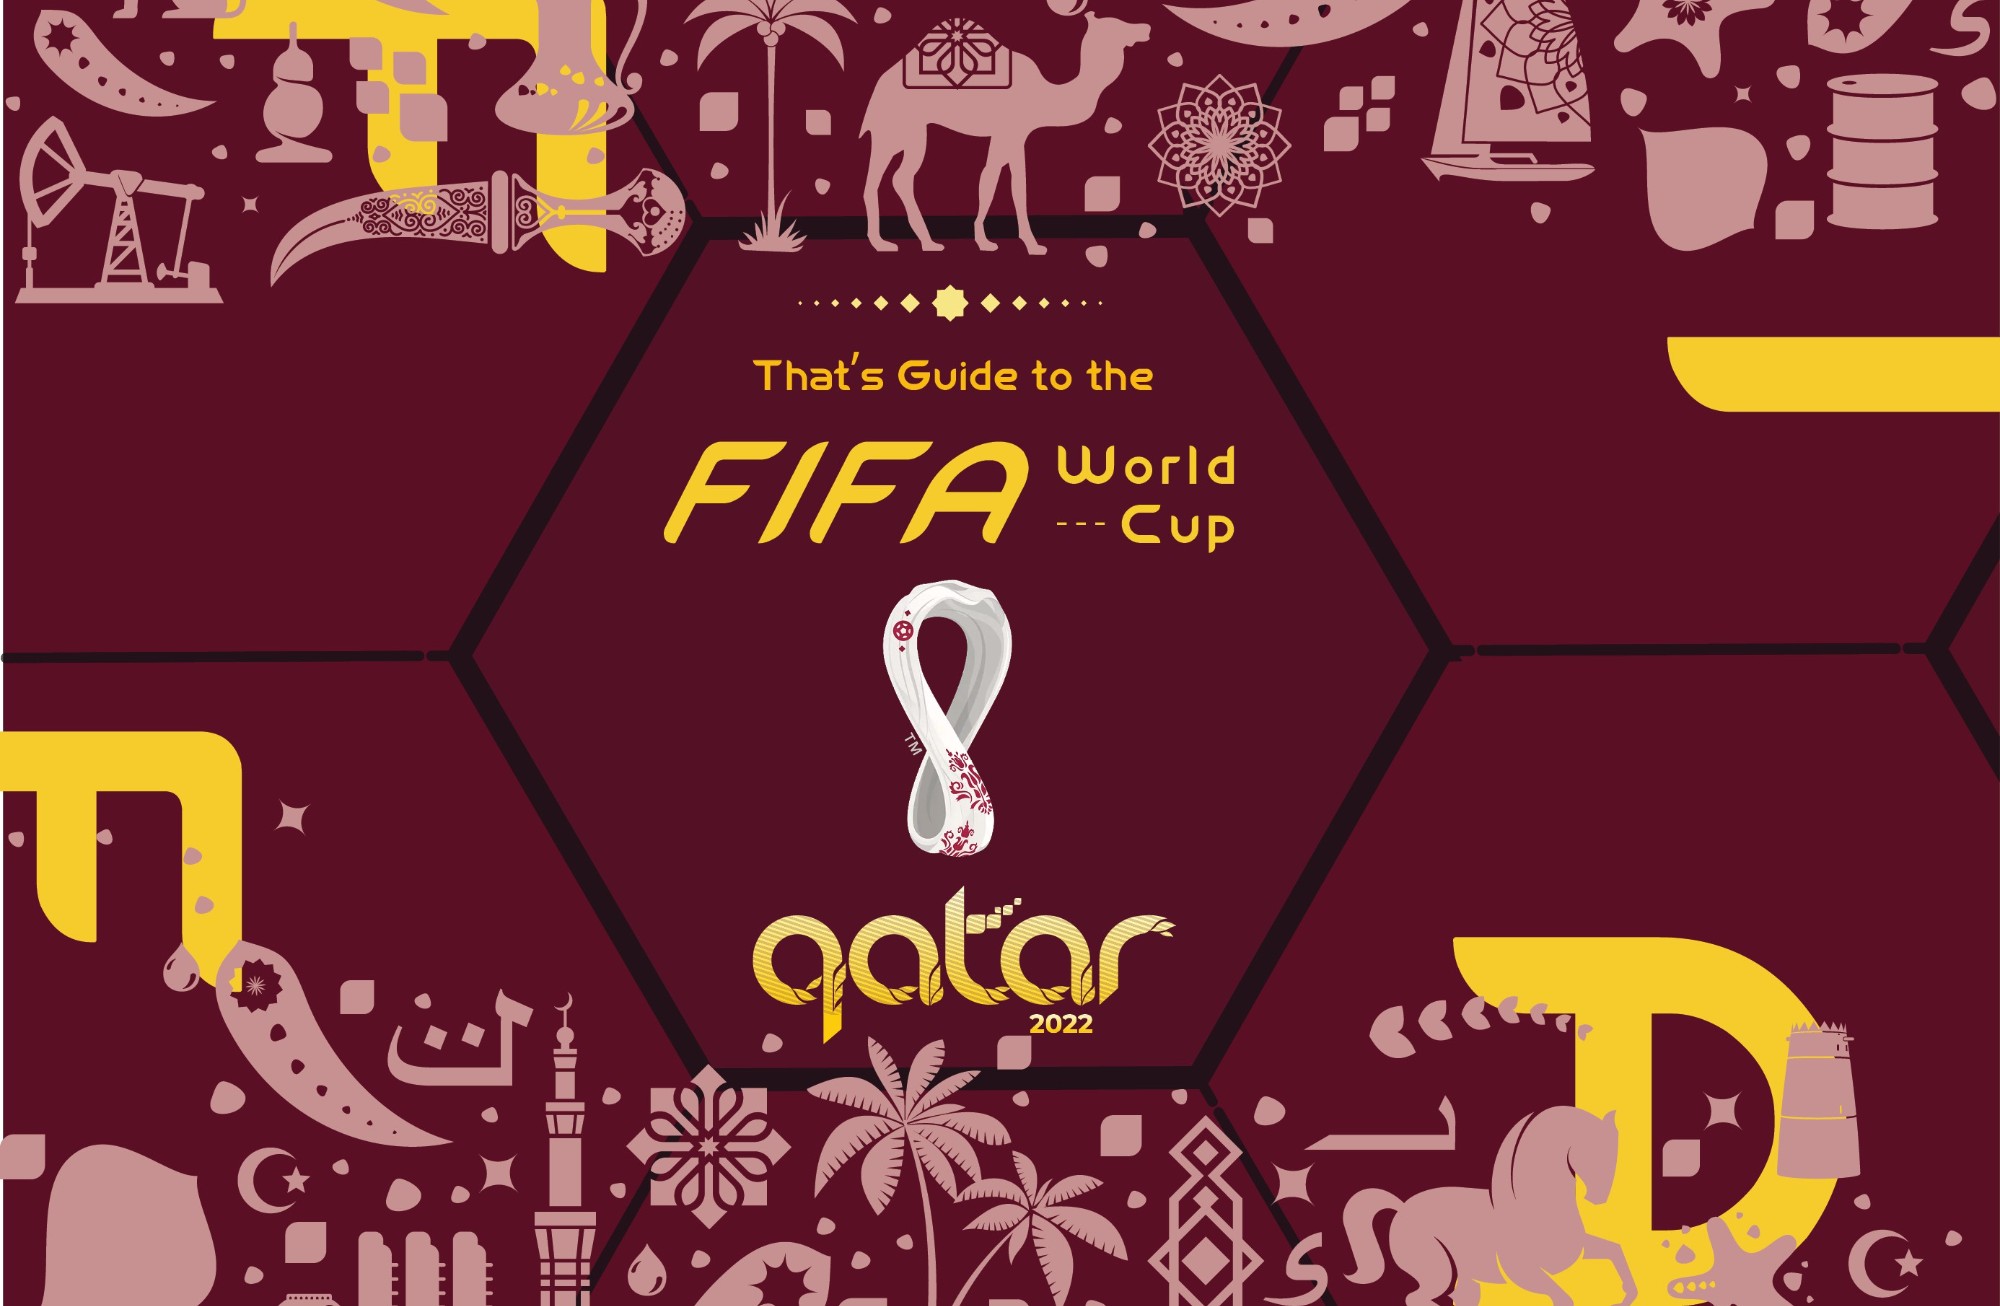 That’s Guide to the FIFA World Cup Qatar 2022: Group F